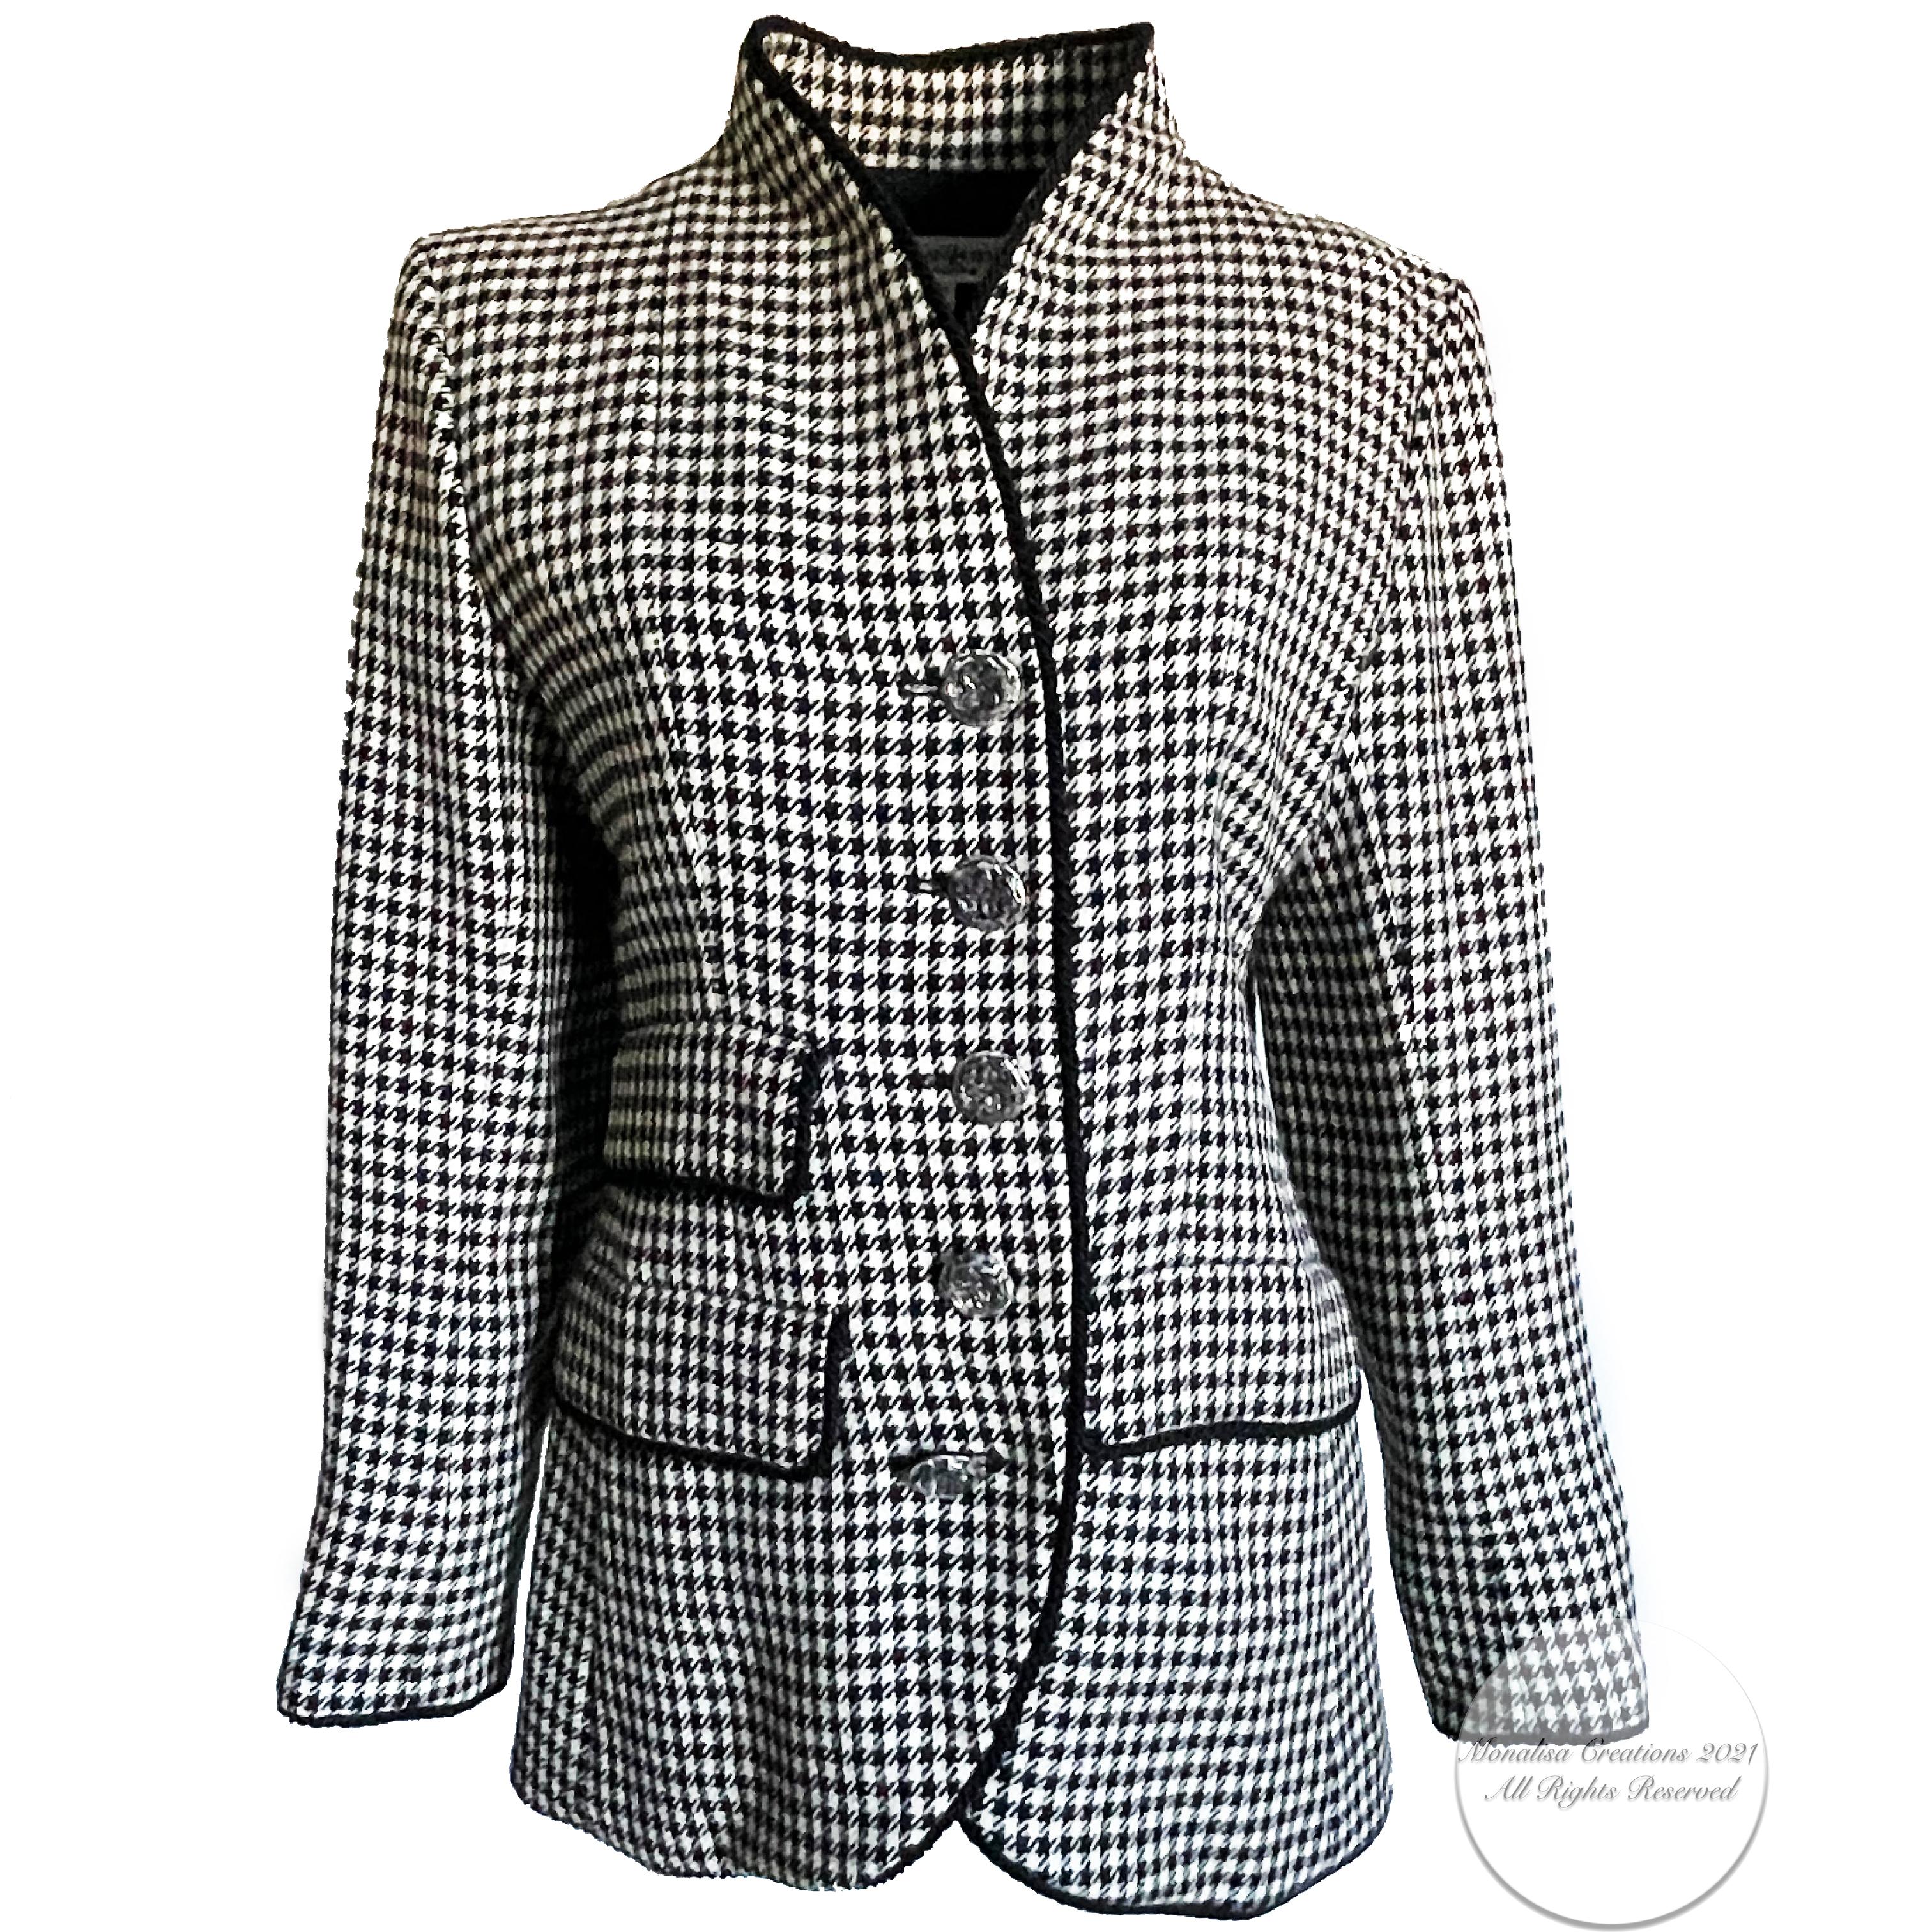 Yves Saint Laurent Jacket Houndstooth Wool Black Rope Trim Floral Buttons Sz 40 2